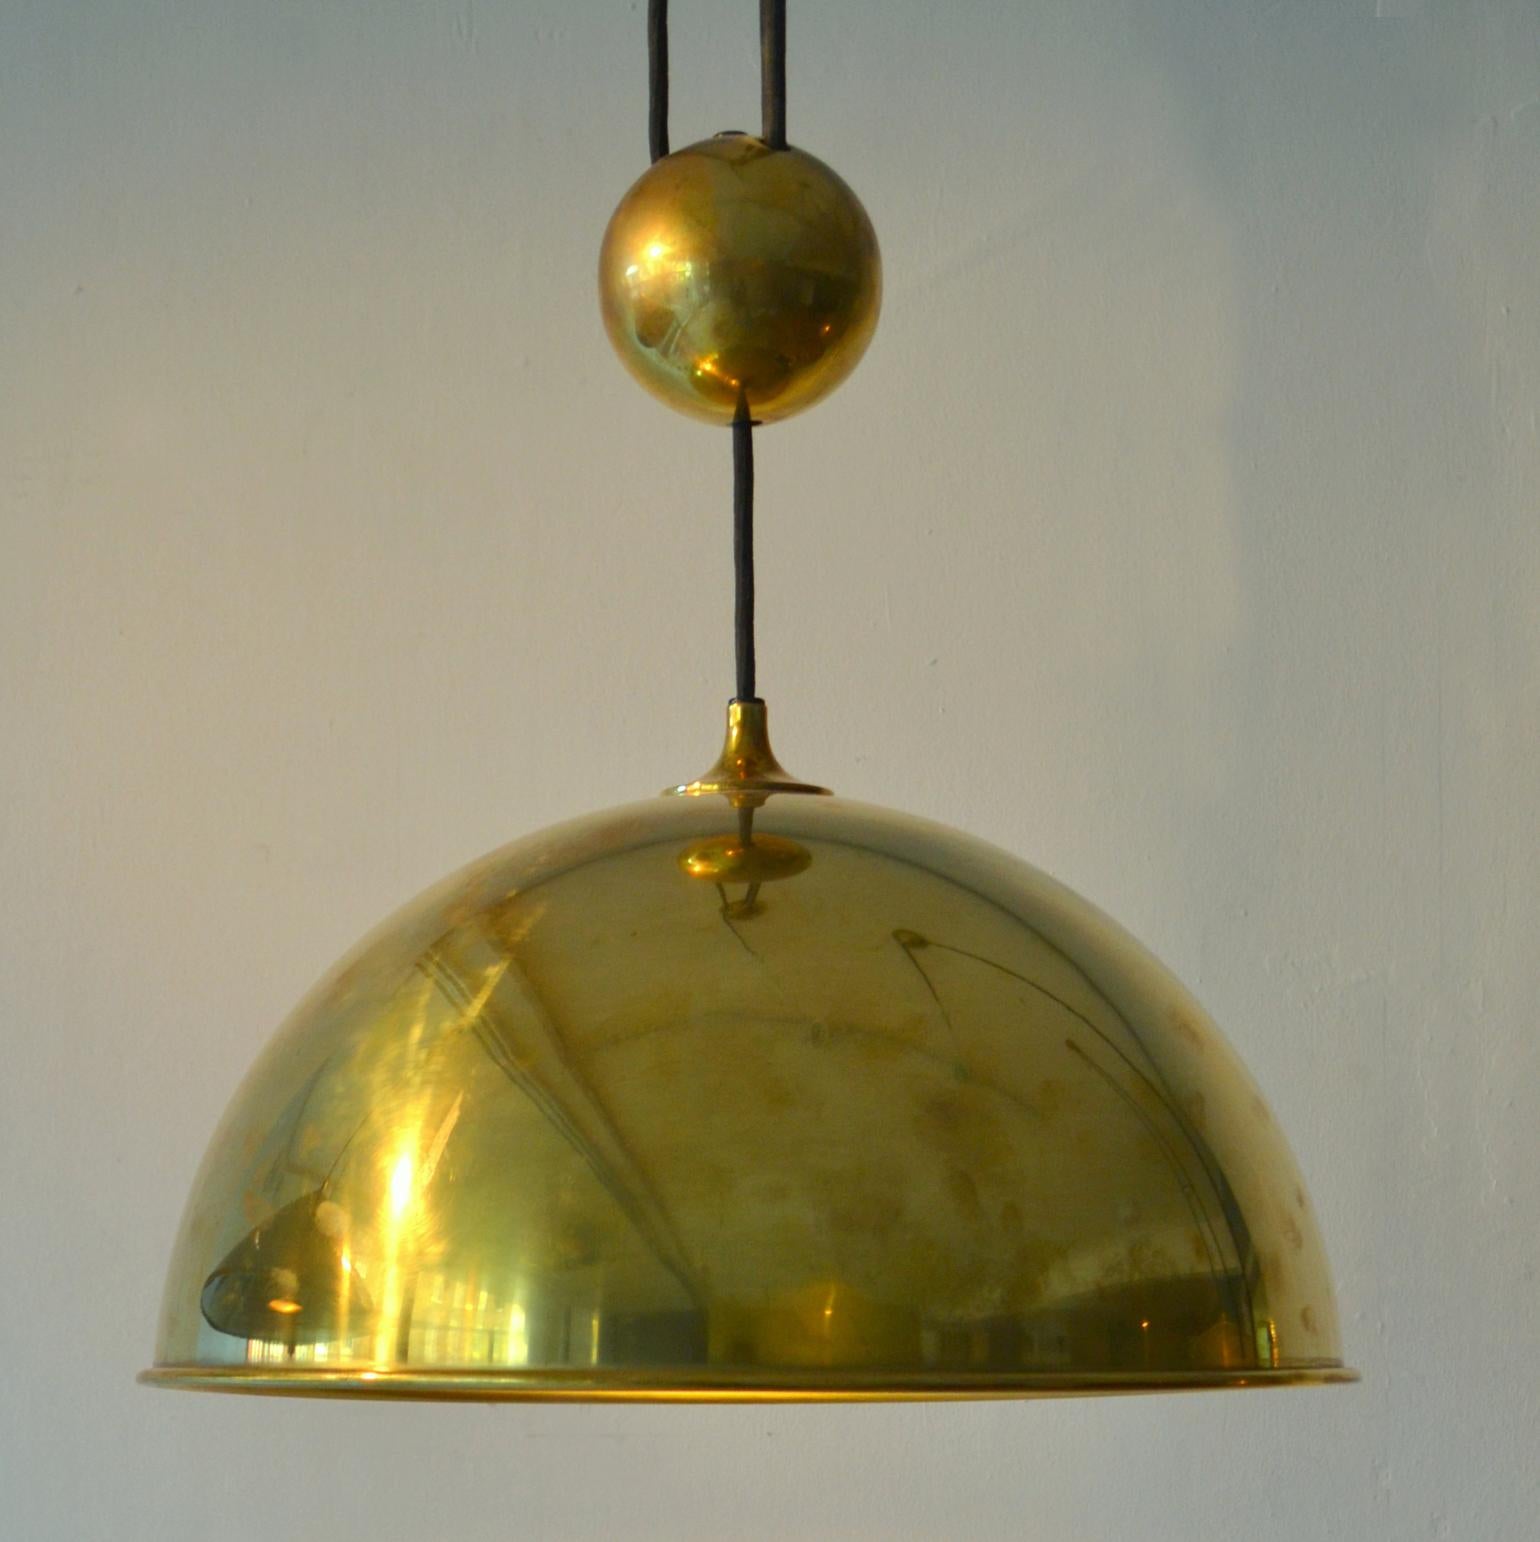 Original counterbalance pendant 'Posa' by Florian Schulz with centre weight. Strong and minimal pendant in a high quality spun brass moves smoothly up and down due to the solid brass counterweight. The brass is coated. 
Excellent timeless design of